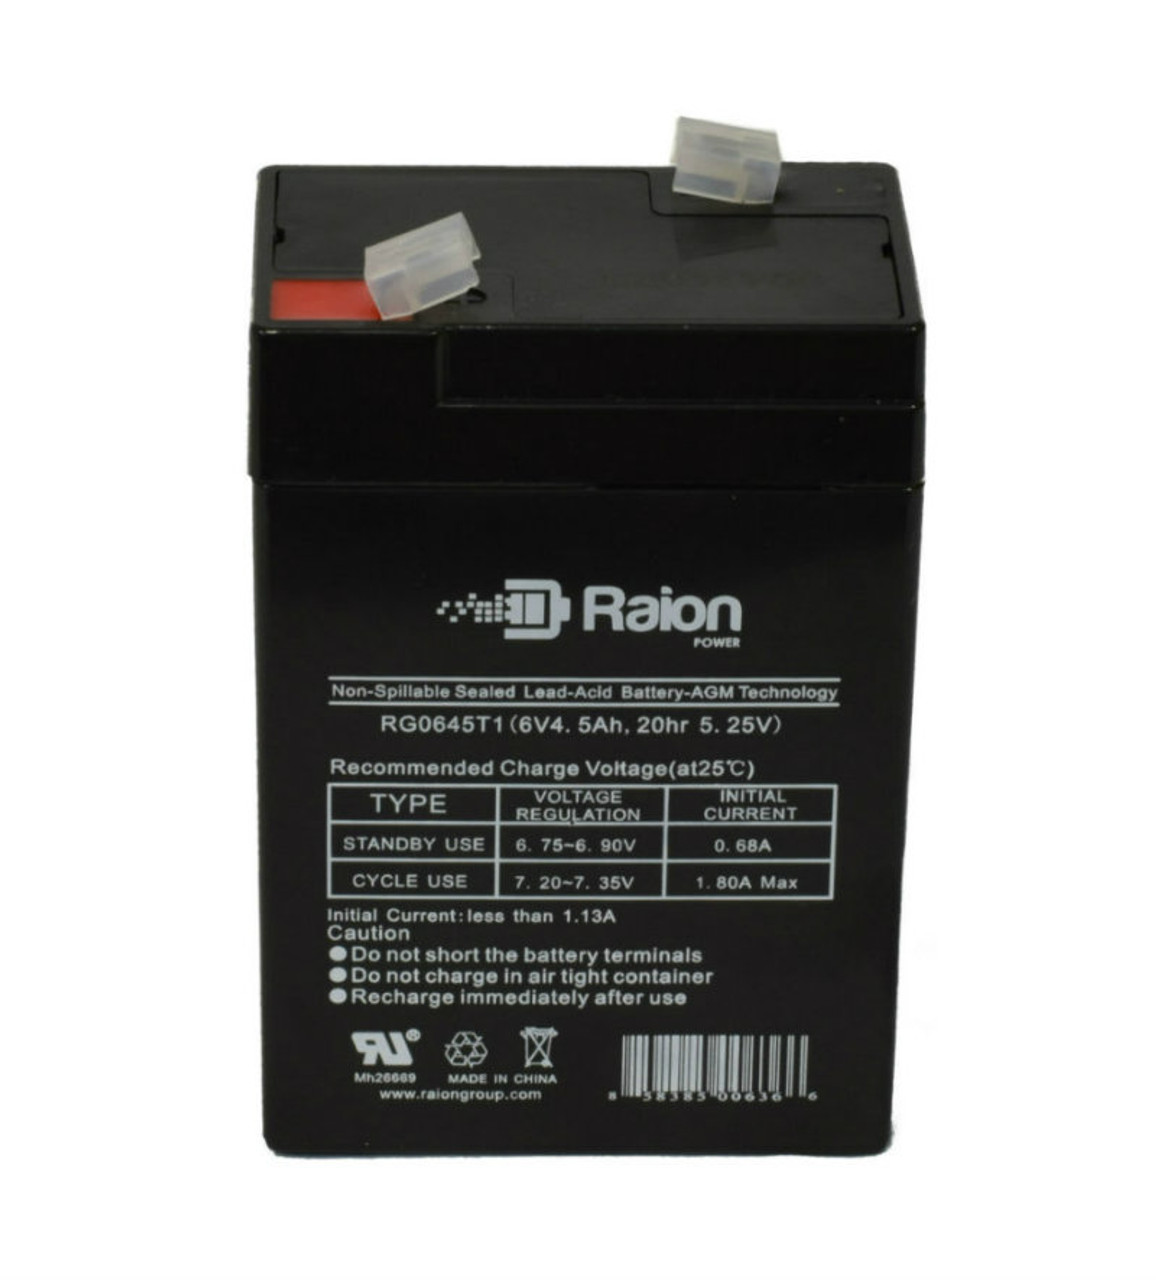 Raion Power RG0645T1 Replacement Battery Cartridge for Light Alarms SQL